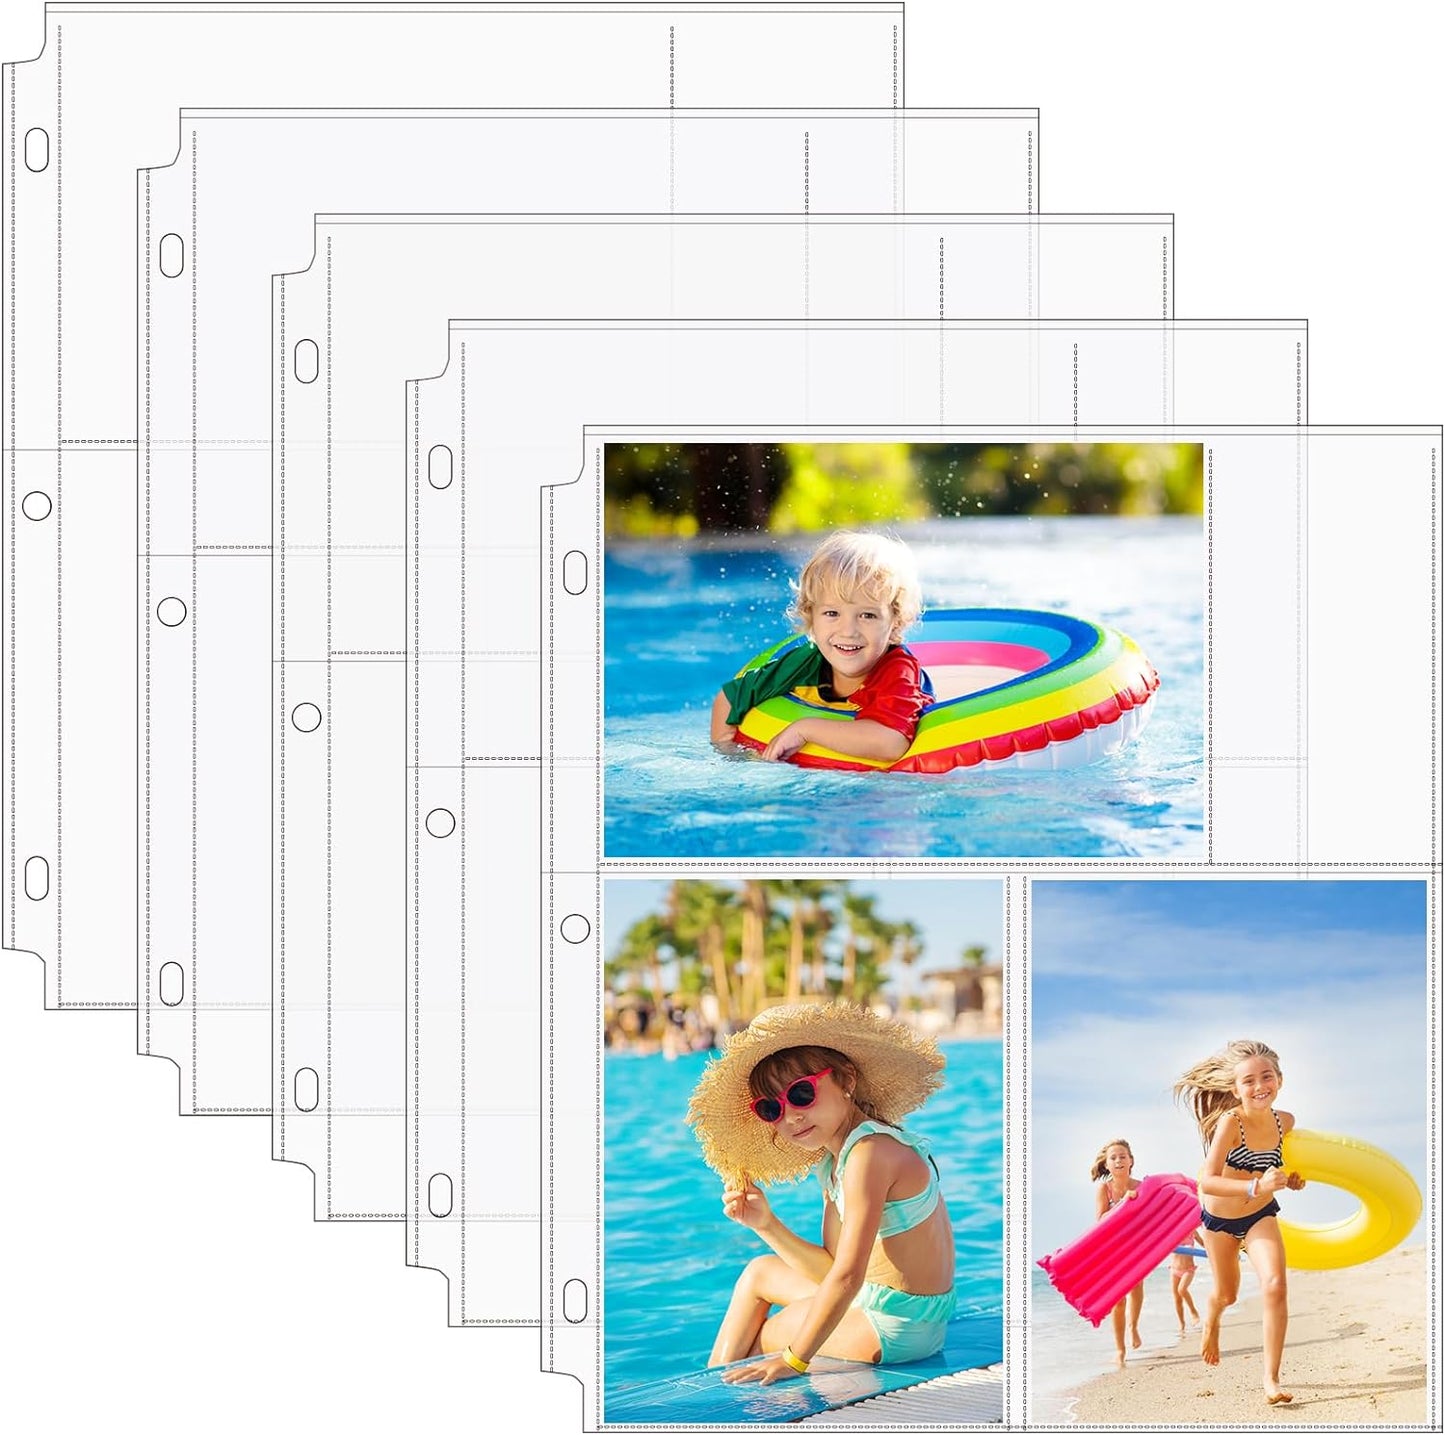 30 Pack Photo Sleeves for 3 Ring Binder 4X6, for 180 Photos Archival Photo Pages Photo Album Refill Pages Photo Sheet Protector Page Protectors 8.5 X 11